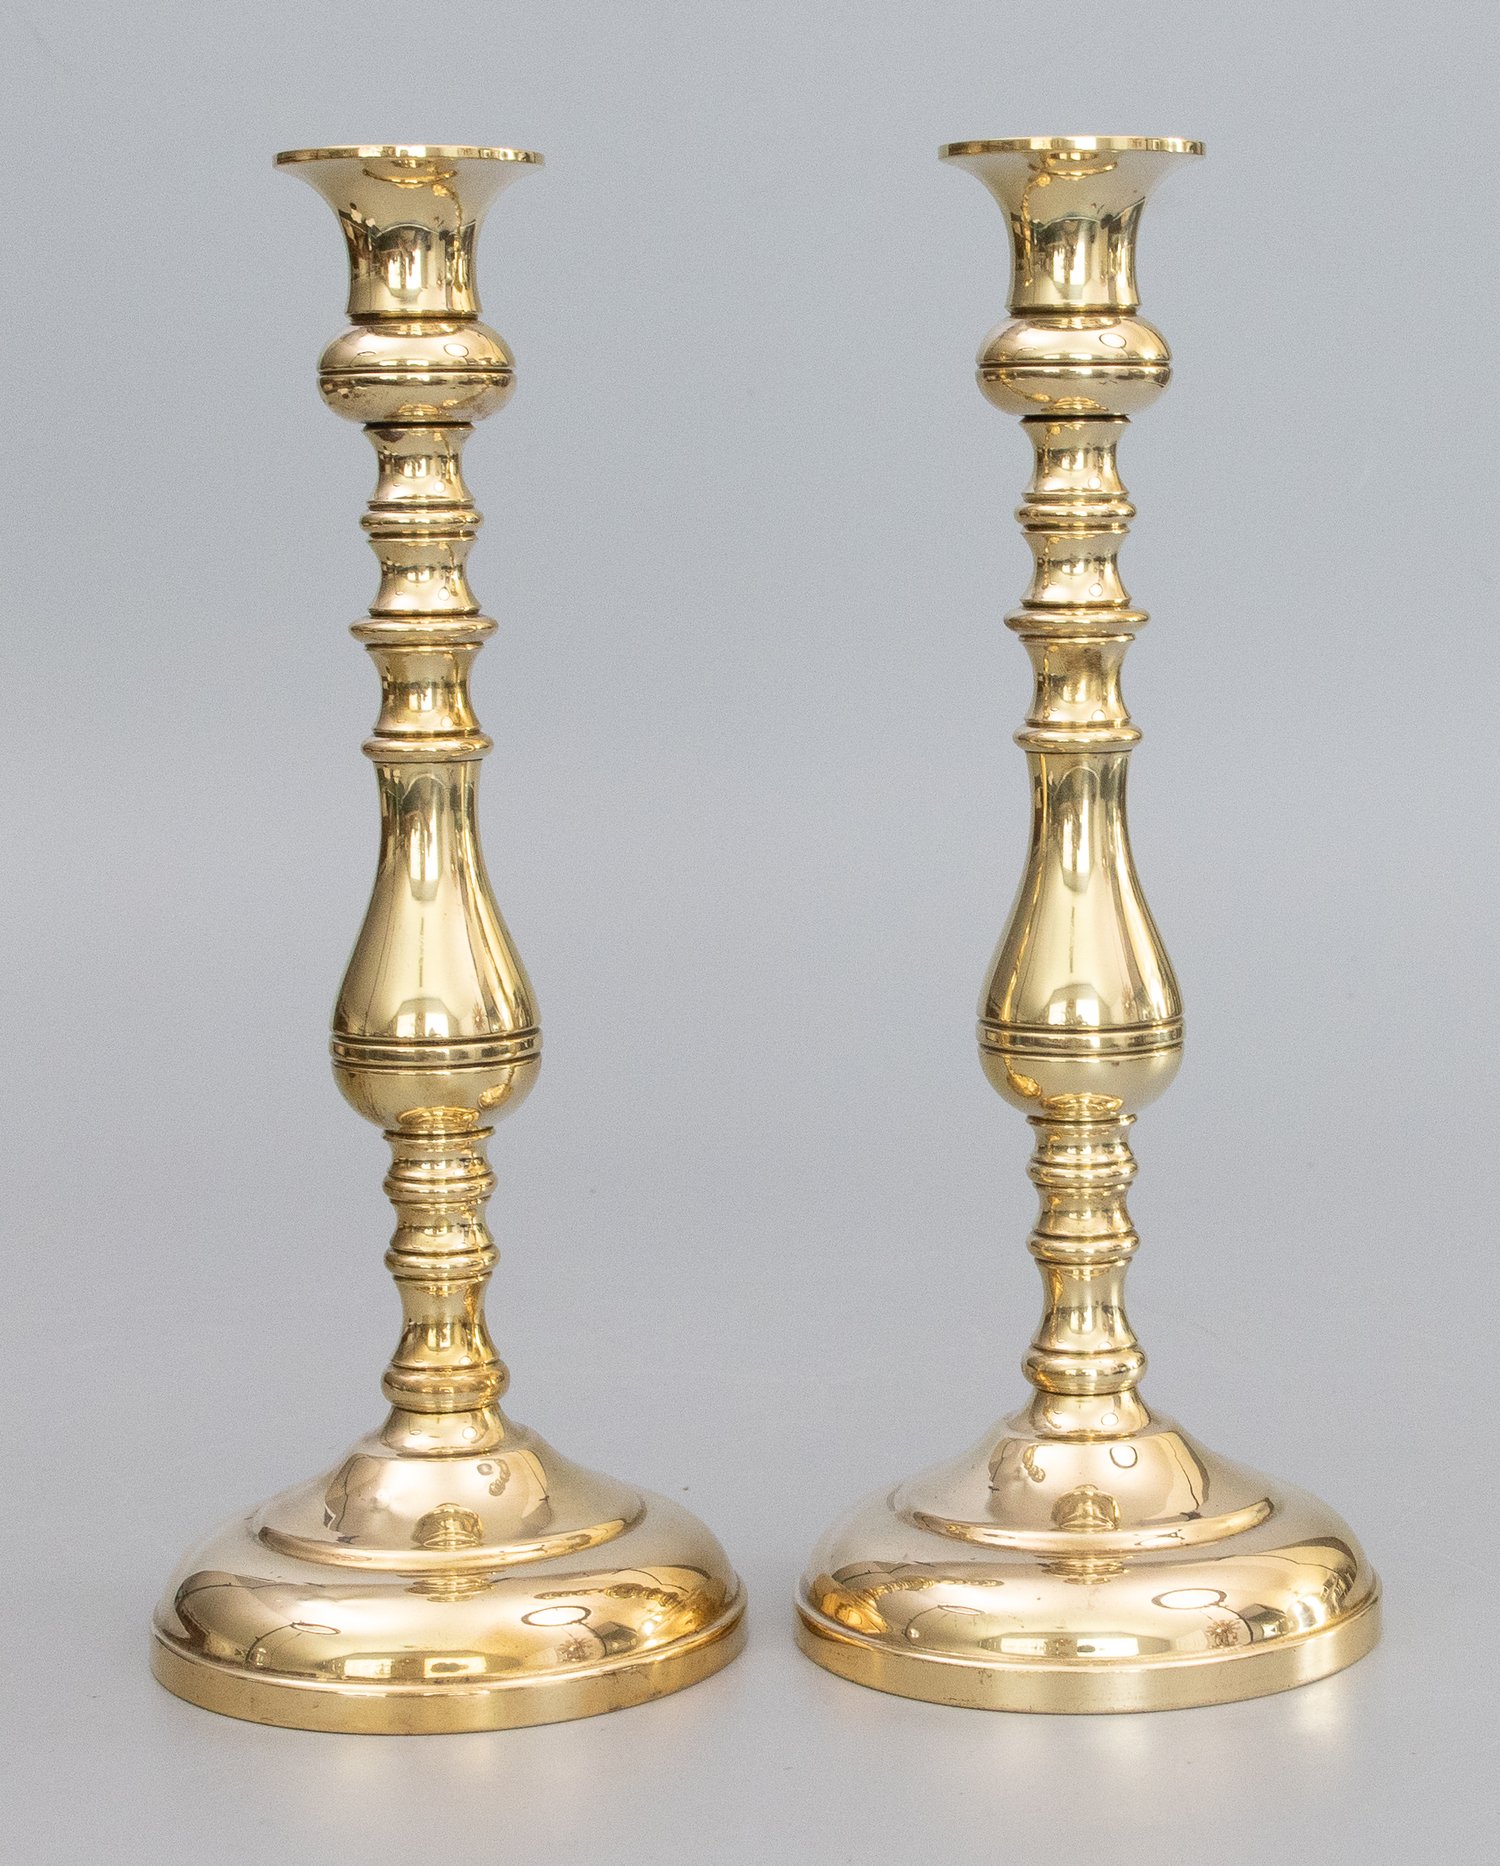 19th Century English Queen Anne Style Polished Brass Candlesticks, a Pair —  Jensen House Antiques